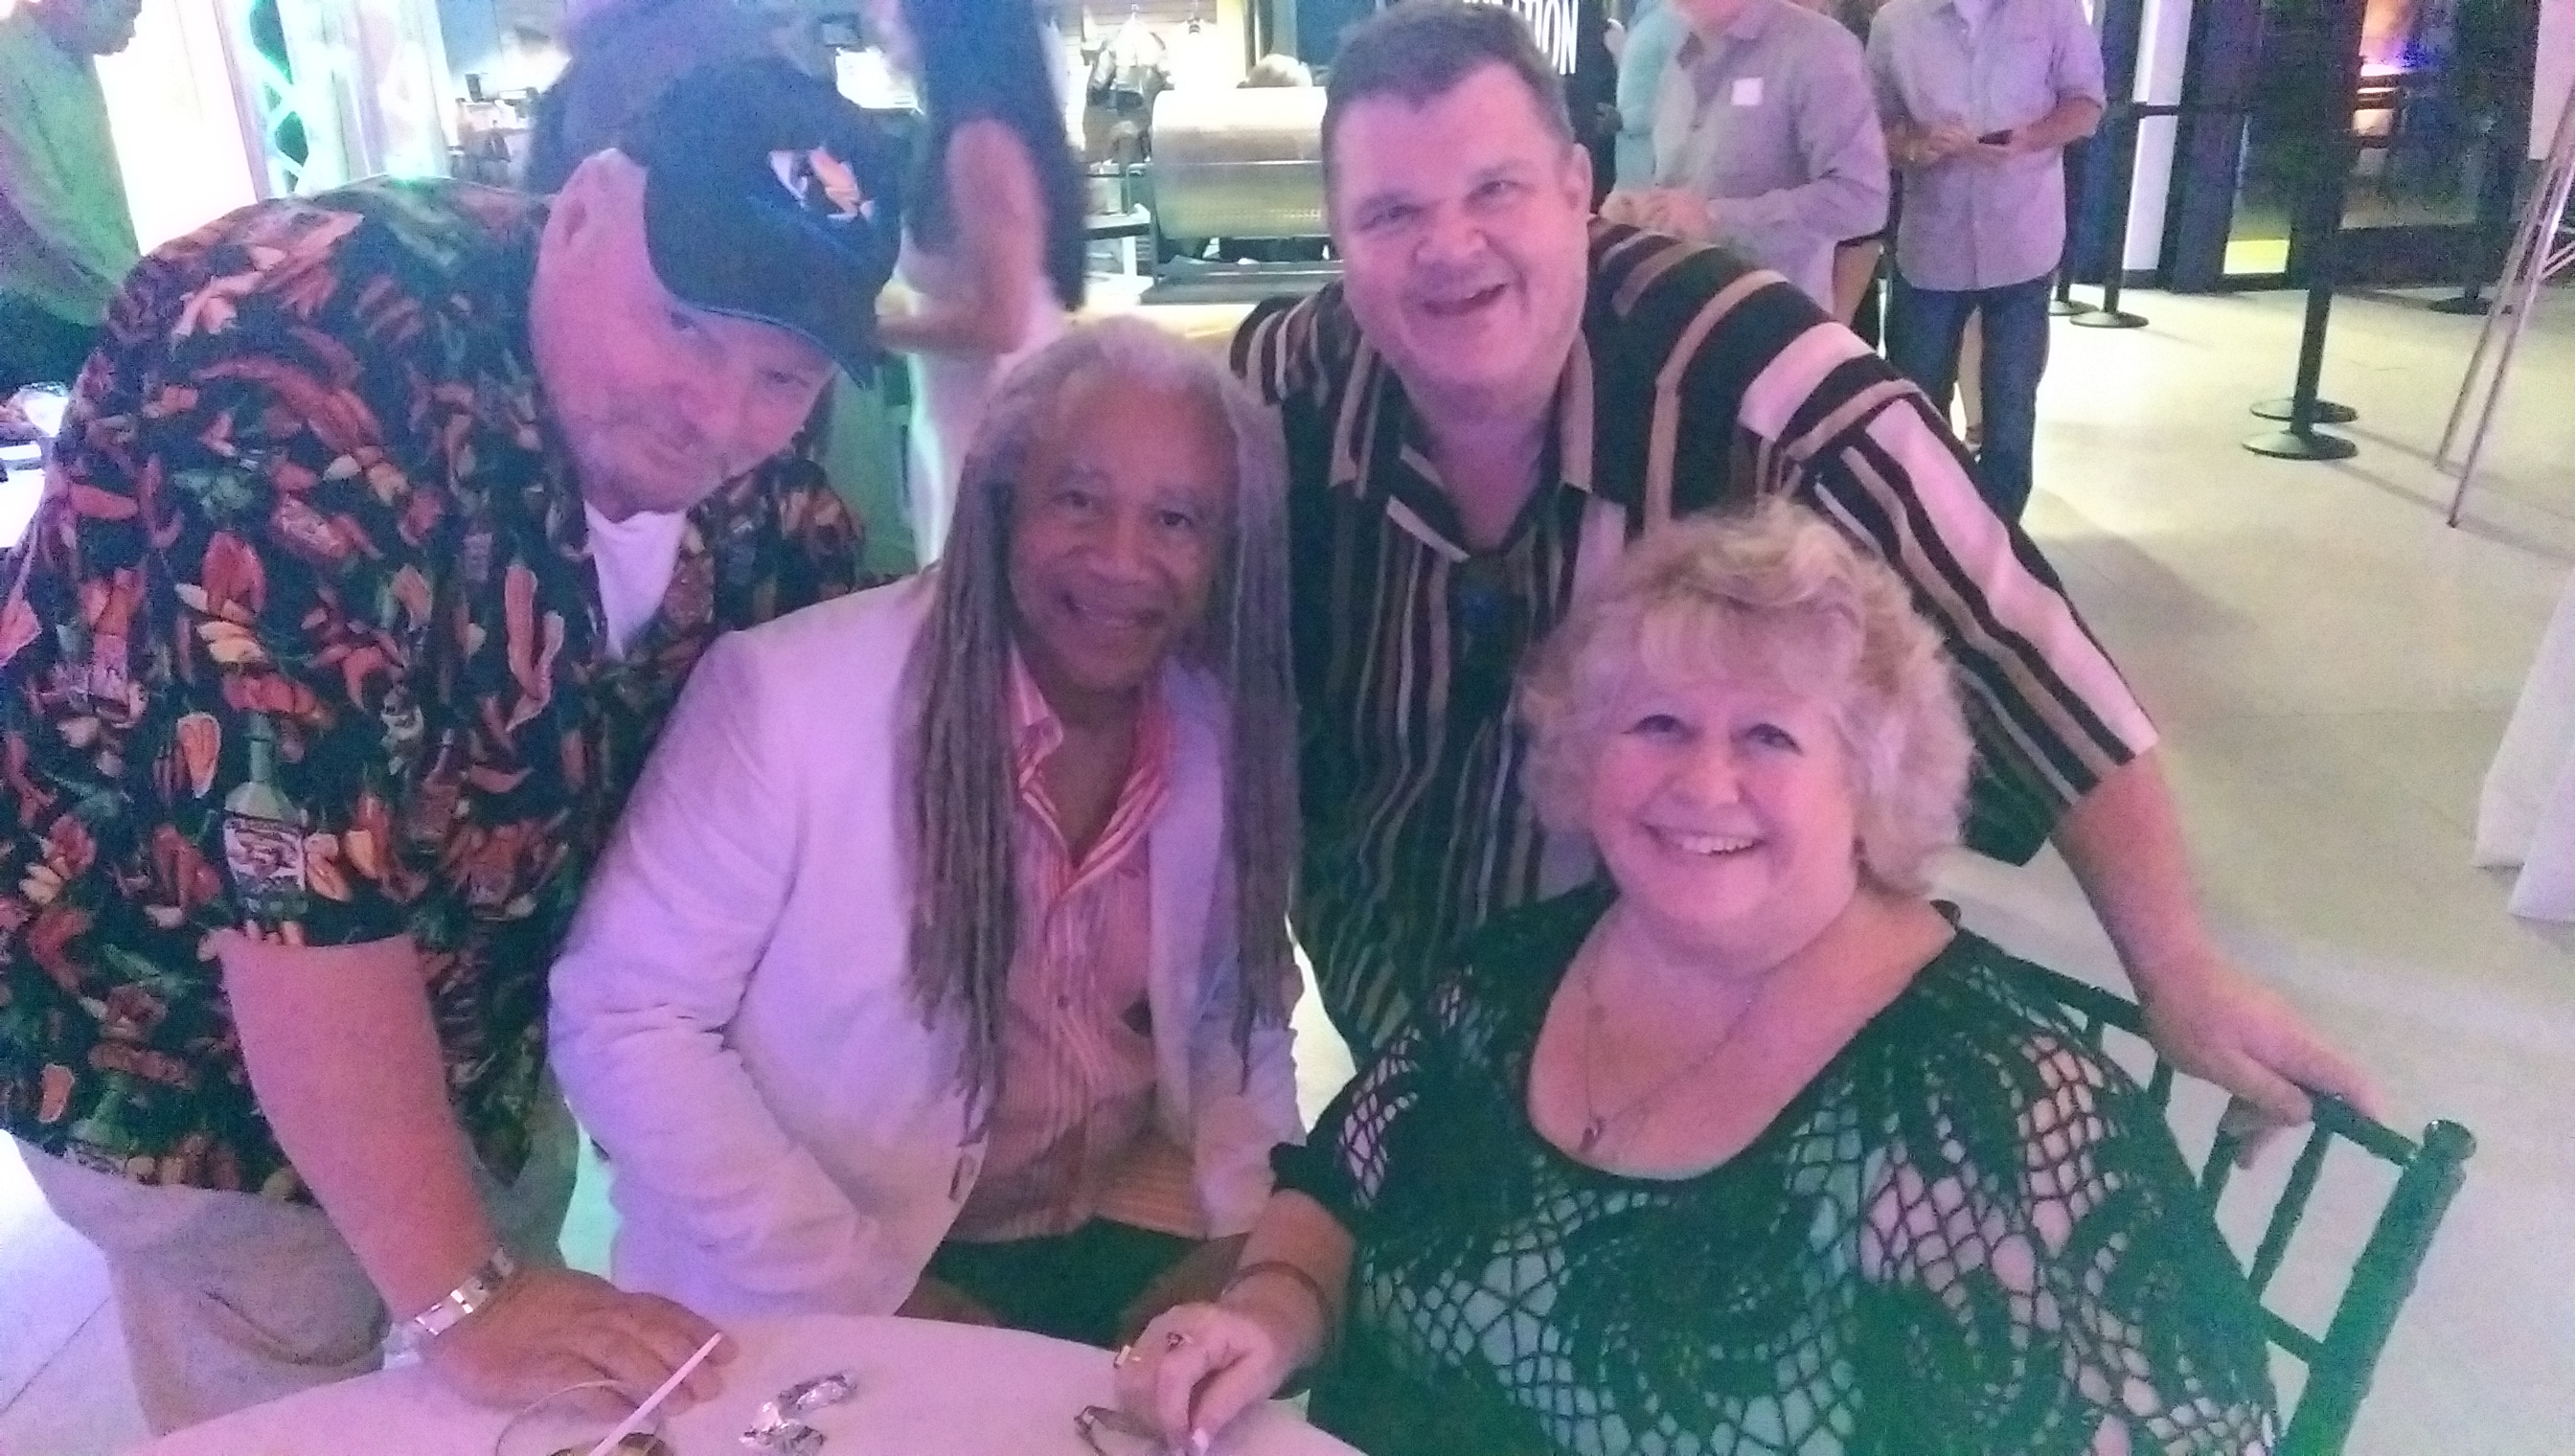 Bubba Da Skitso with V/O legends Dave Fennoy and Joyce Castellano at the fundraiser heald at the Museum of Flying to benefit the Don LaFontaine v/o Lab at SAG Foundation, SAG-AFTRA HQ in Hollywood.